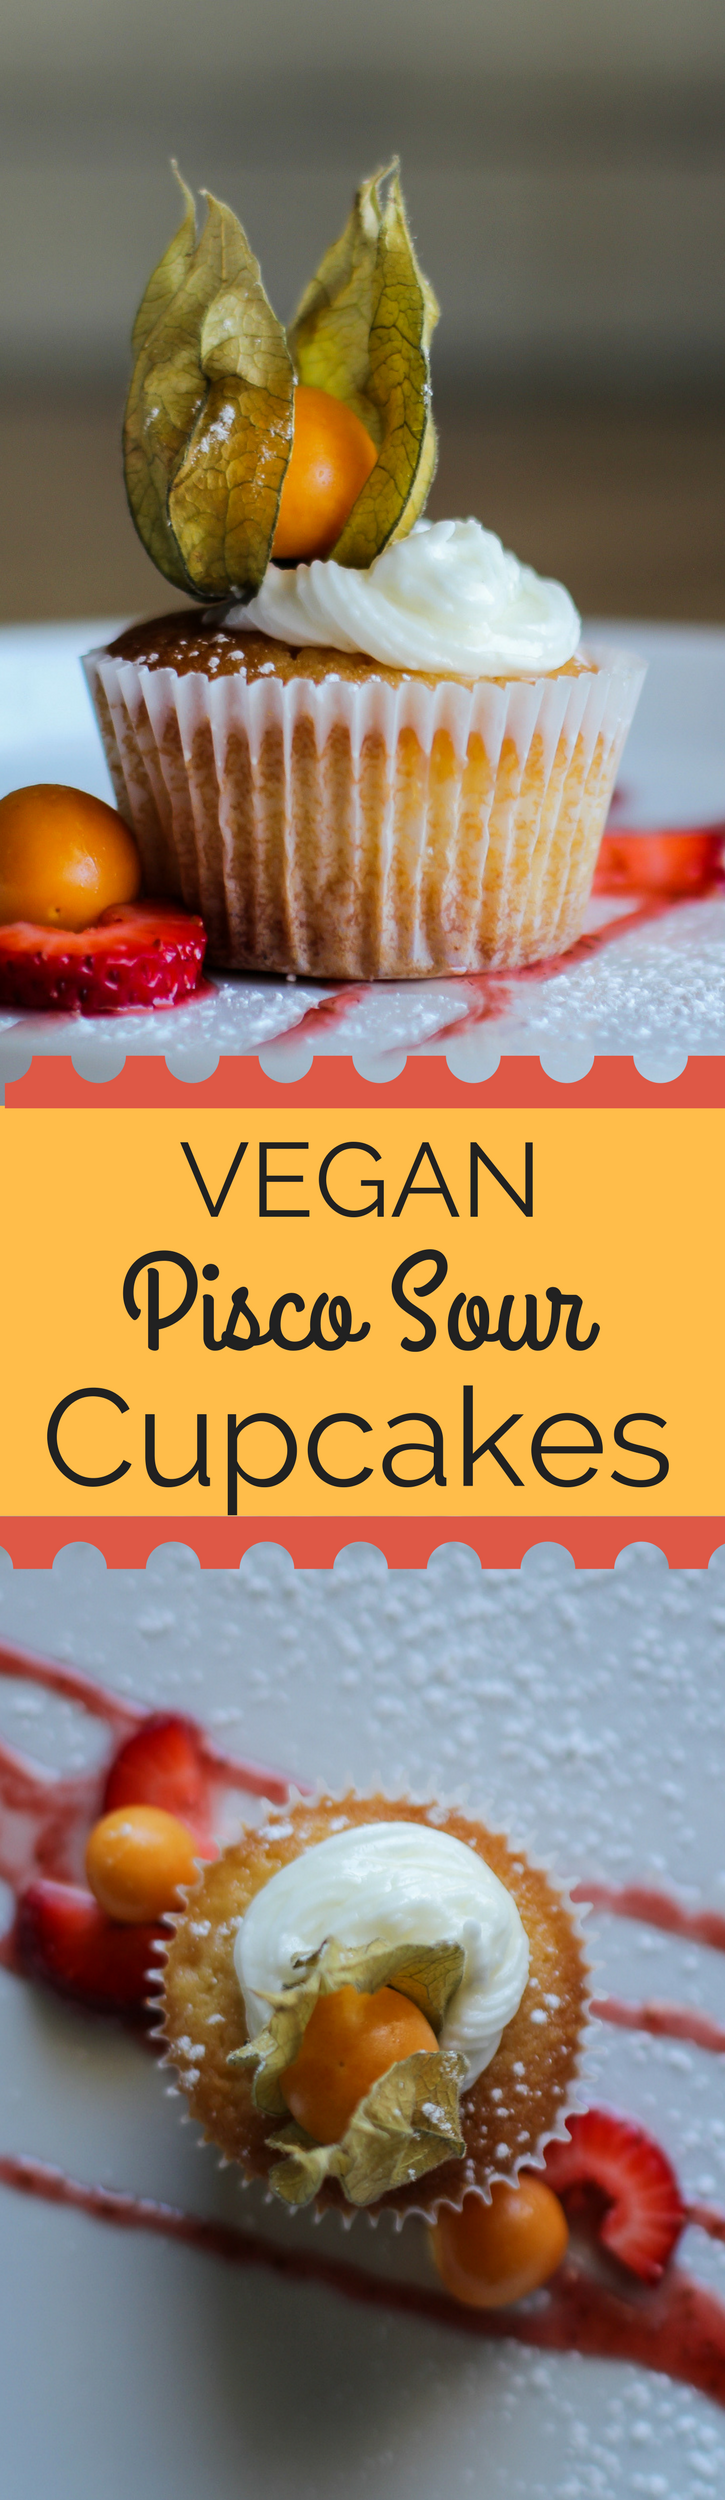 Velvety smooth vegan cupcakes with a kick from lime and pisco, feature a unique fruit indigenous to Peru-the pichuberry or cape gooseberry.